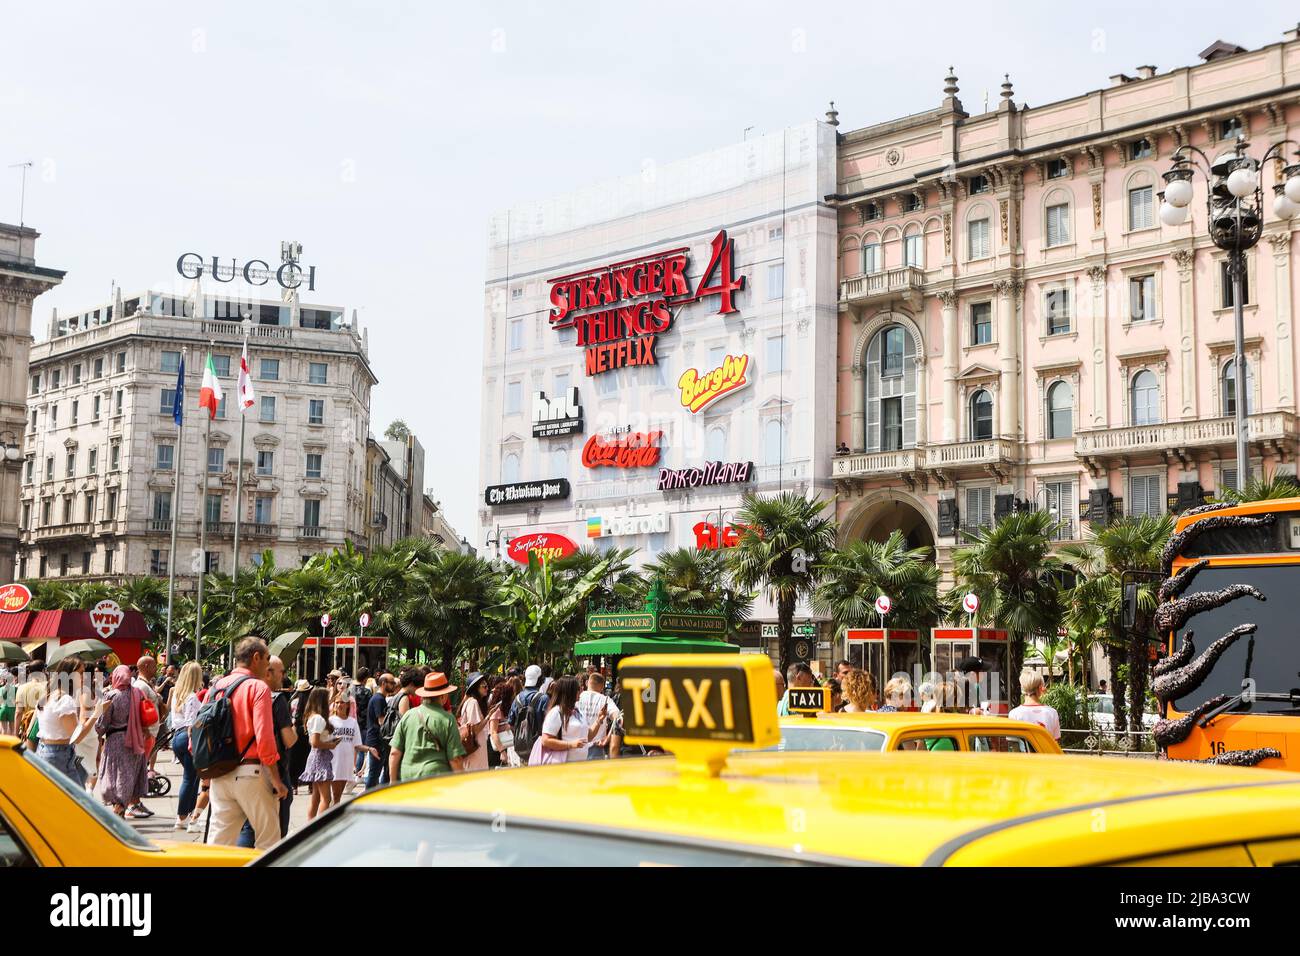 Netflix launch campaign for the release of Stranger Things 4 in Piazza Duomo, Milano, Italy, on May 27 2022. For the occasion, the centre of Milan has been decked out with activities reminiscent of the 1980s Stock Photo